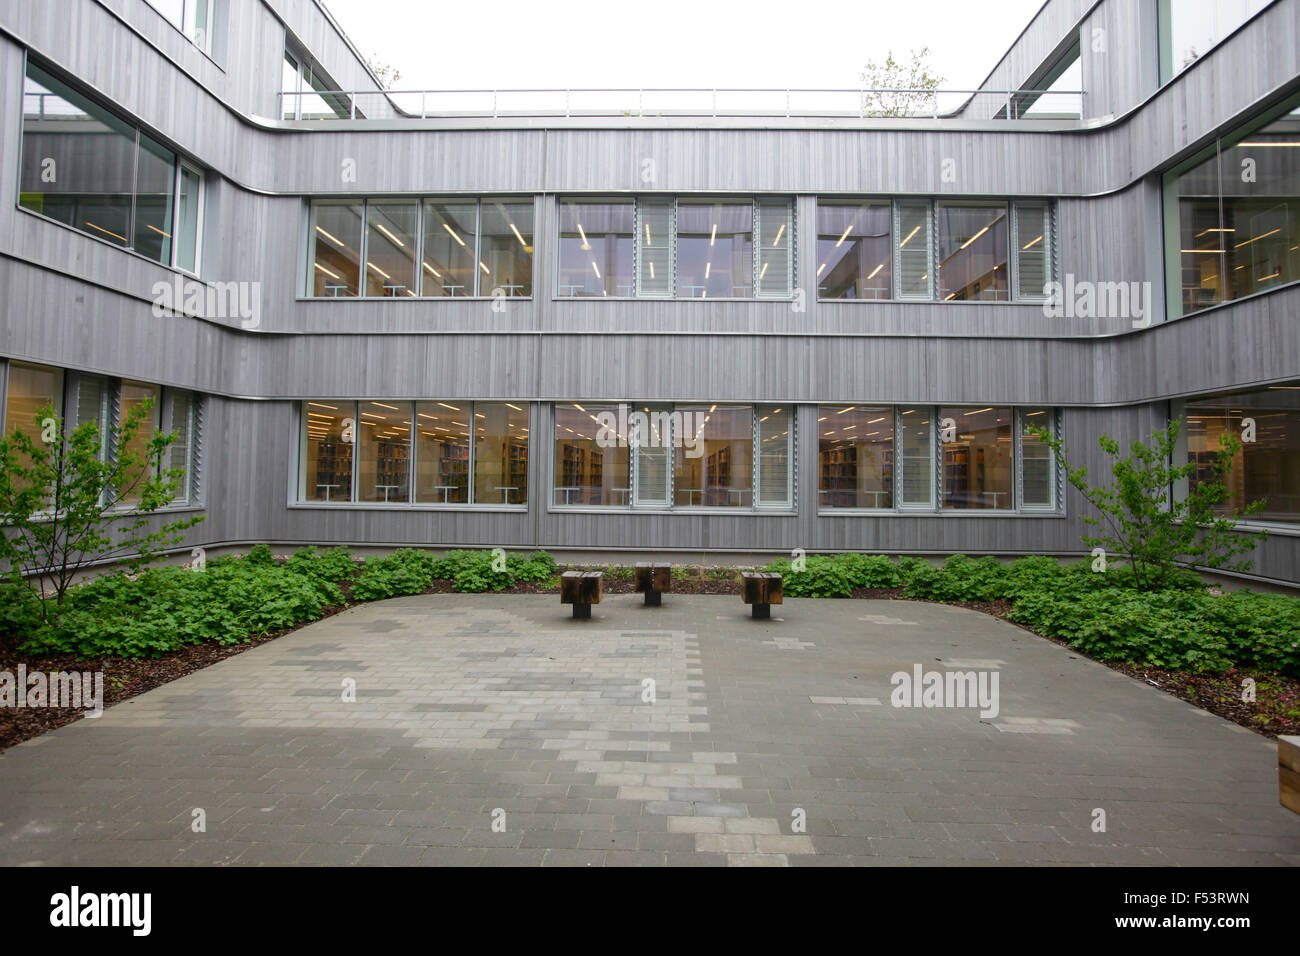 27.04.2015, Berlin, Berlin, Germany - Freie UniversitŠt (FU) Berlin presents the new building for small pockets and the campus library. 0PA150427D763CAROEX.JPG - NOT for SALE in G E R M A N Y, A U S T R I A, S W I T Z E R L A N D [MODEL RELEASE: NOT APPLICABLE, PROPERTY RELEASE: NO (c) caro photo agency / Ponizak, http://www.caro-images.pl, info@carofoto.pl - In case of using the picture for non-journalistic purposes, please contact the agency - the picture is subject to royalty!] Stock Photo